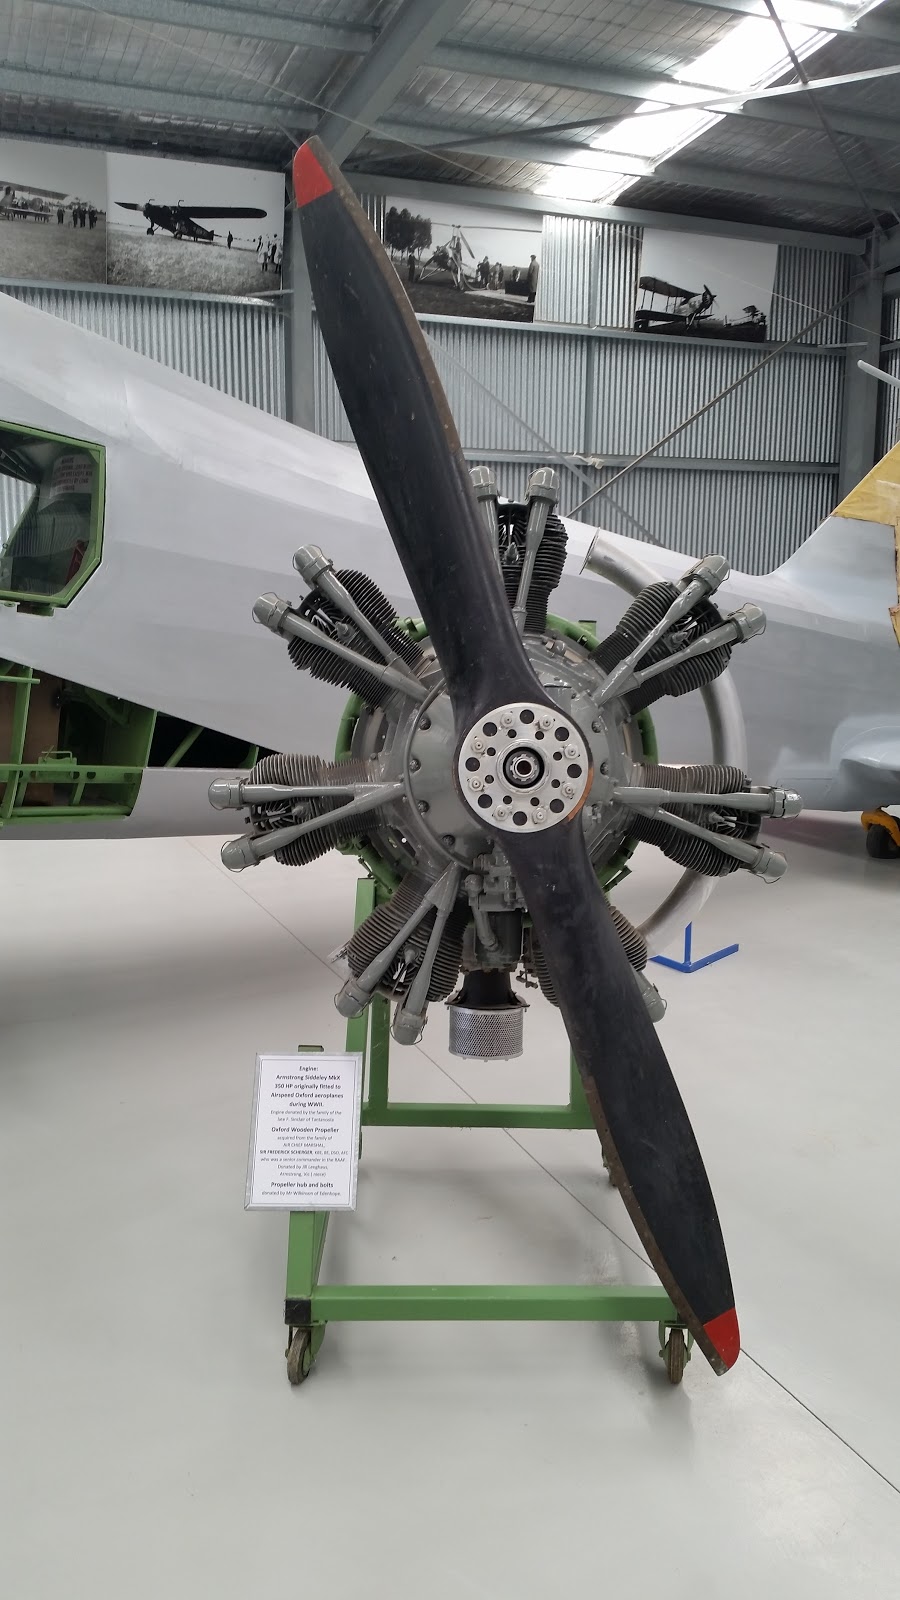 Nhill Aviation Heritage Centre | museum | Nhill VIC 3418, Australia | 0490657770 OR +61 490 657 770